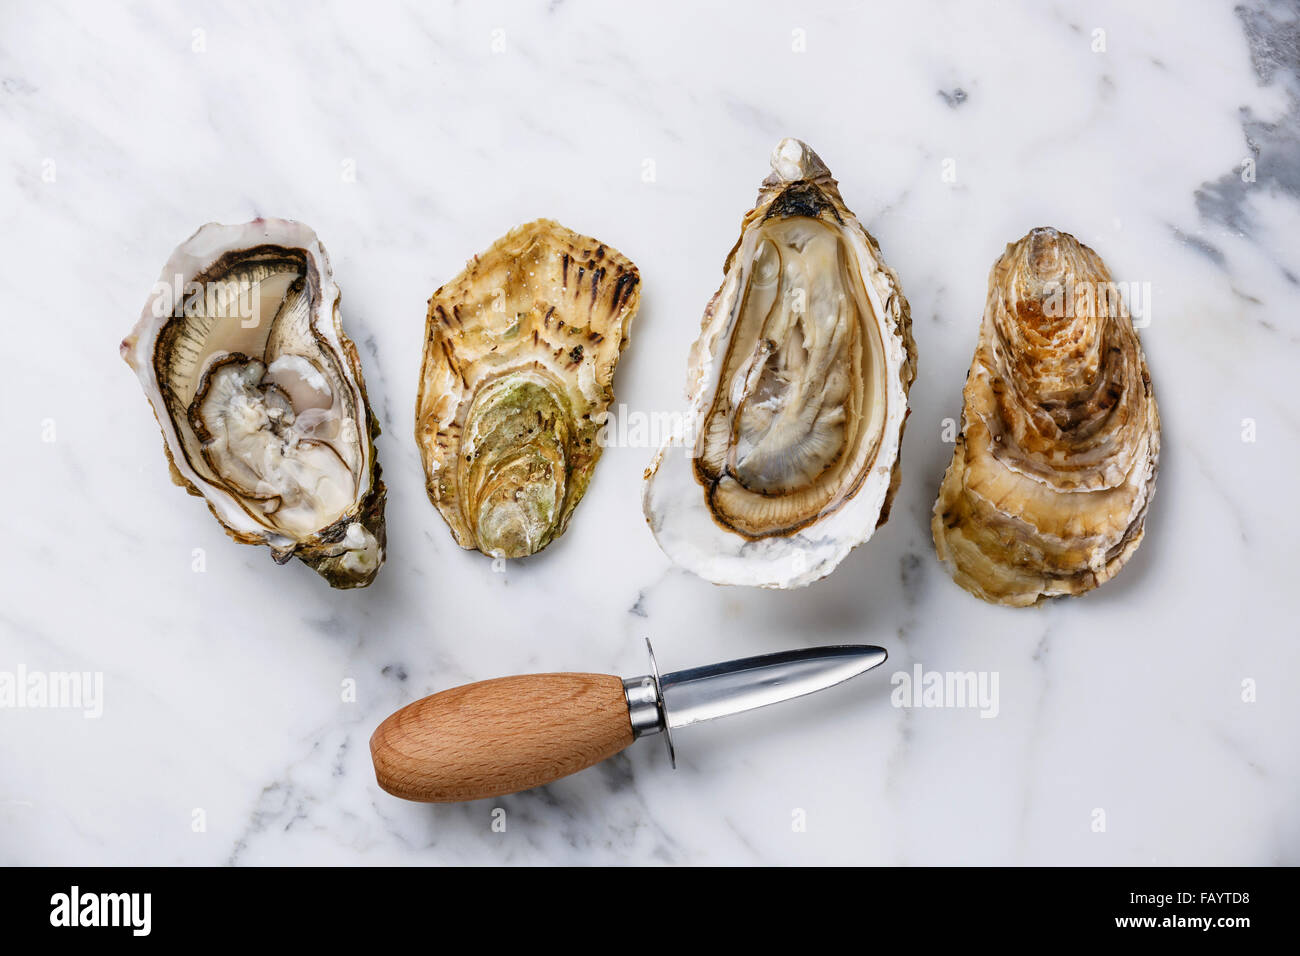 Shucked Oysters Fines de Claire and oyster knife on white marble background Stock Photo